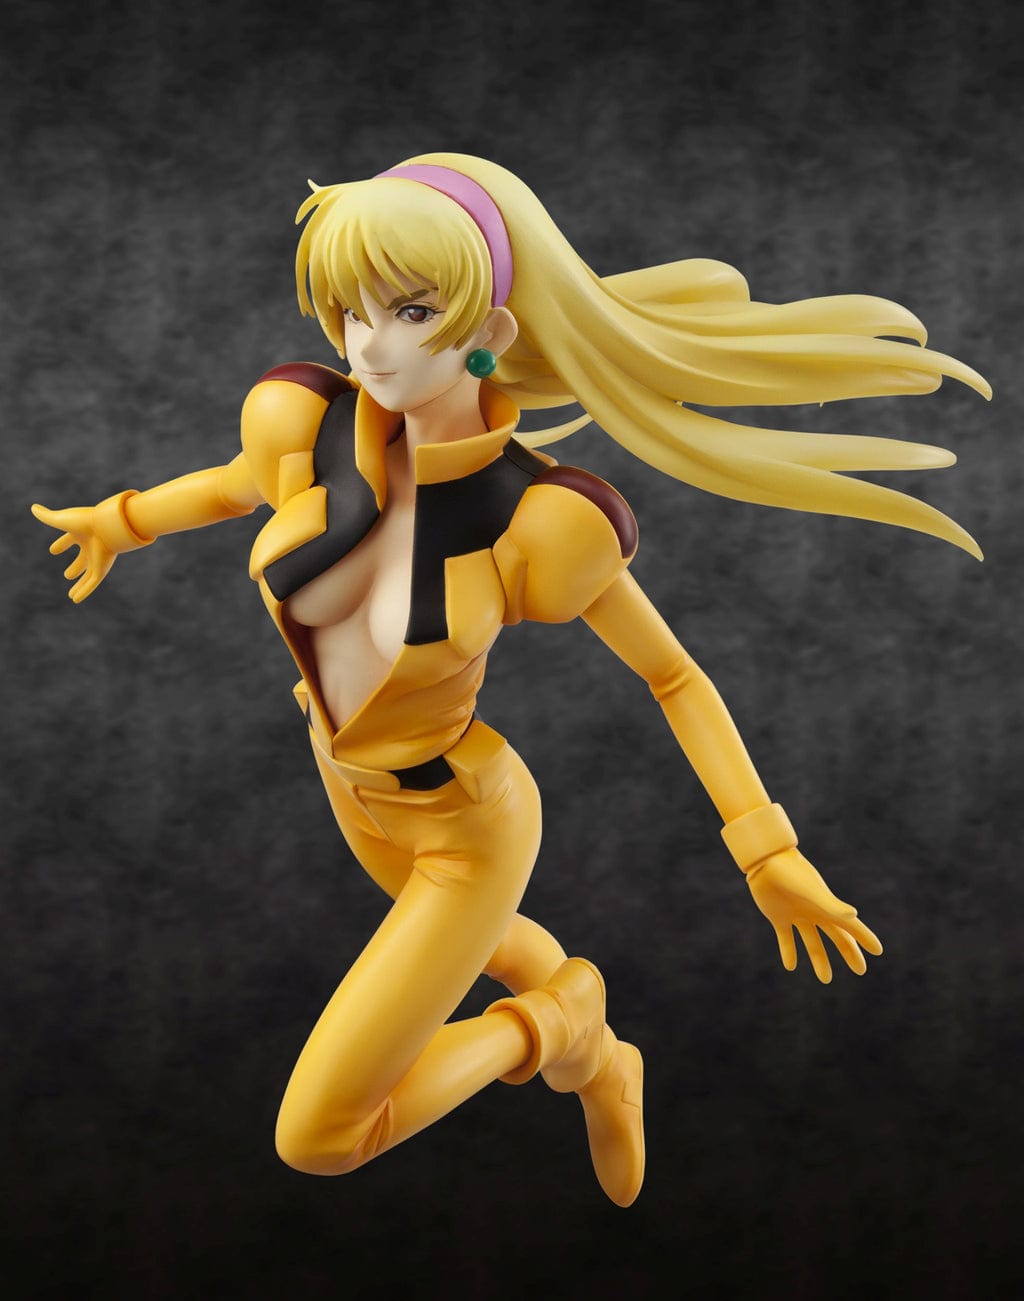 Megahouse EXCELLENT MODEL SERIES RAHDX G.A.NEO MOBILE SUIT VICTORY GUNDAM Loos Katejina (Repeat)